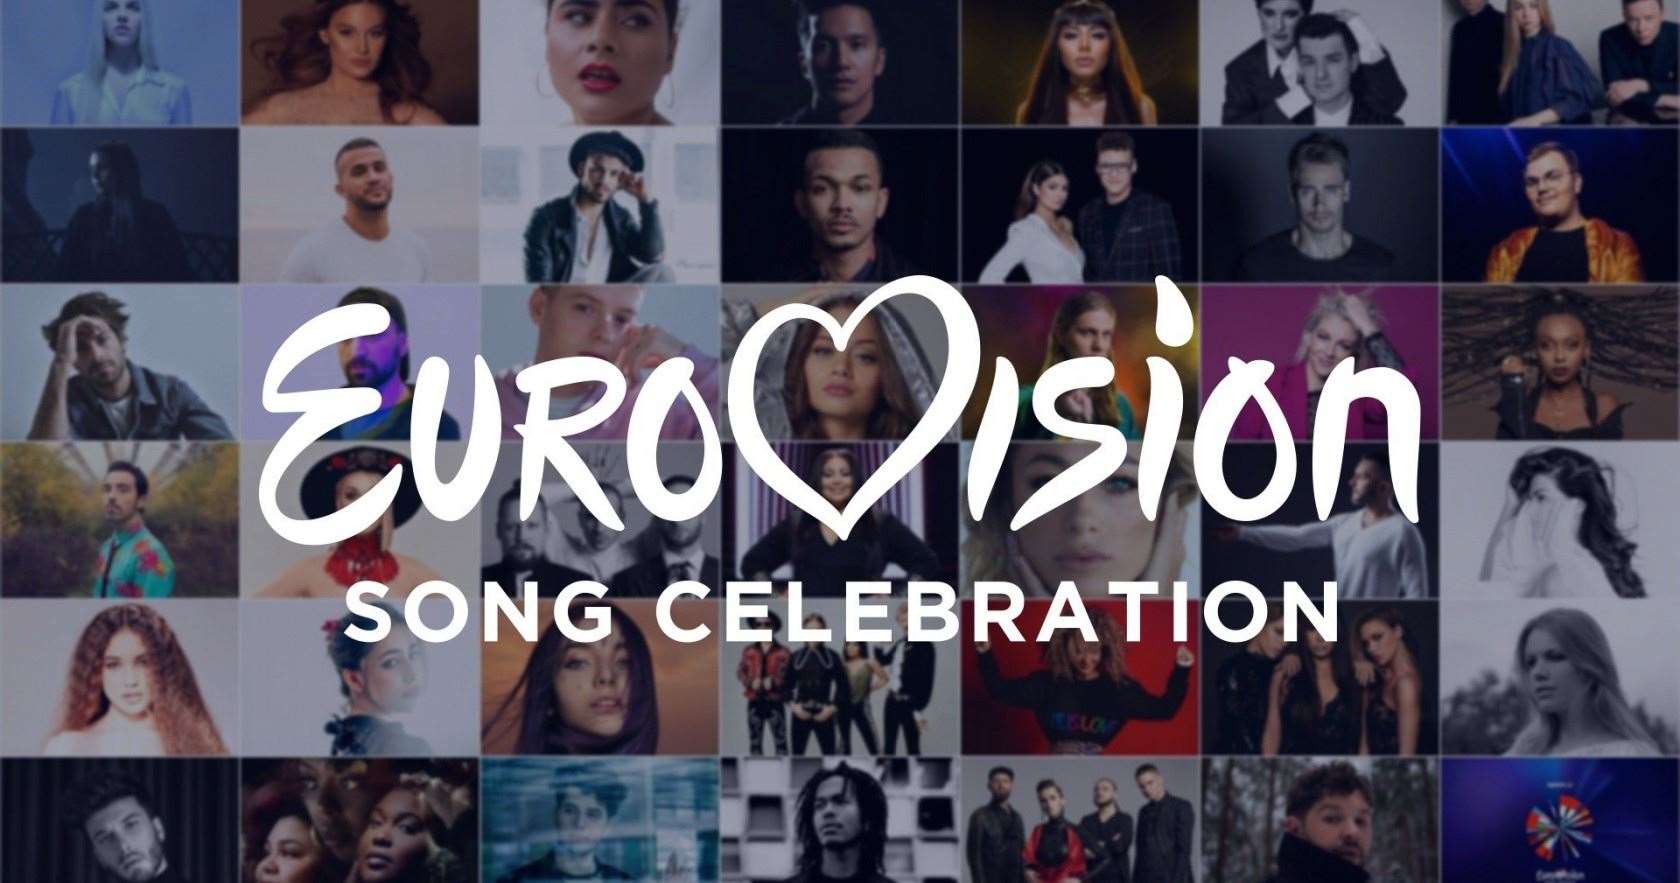 The EuroVision Song Celebration happens online next week